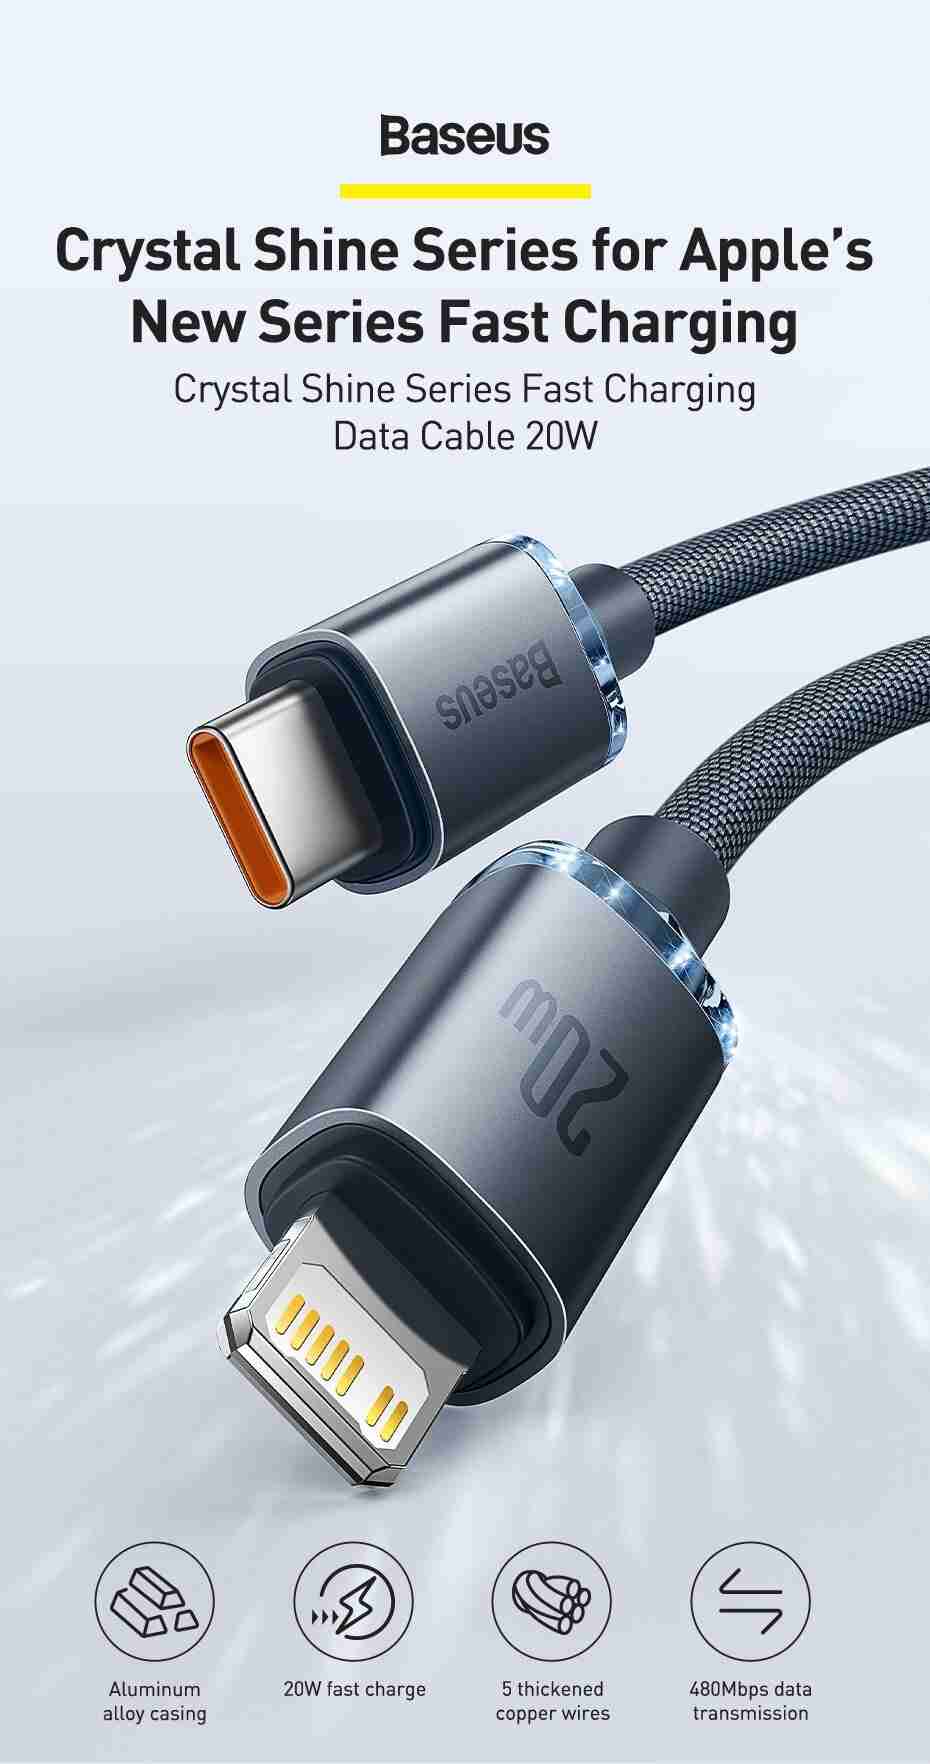 Baseus Crystal Shine Series 20W Fast Charging Cable